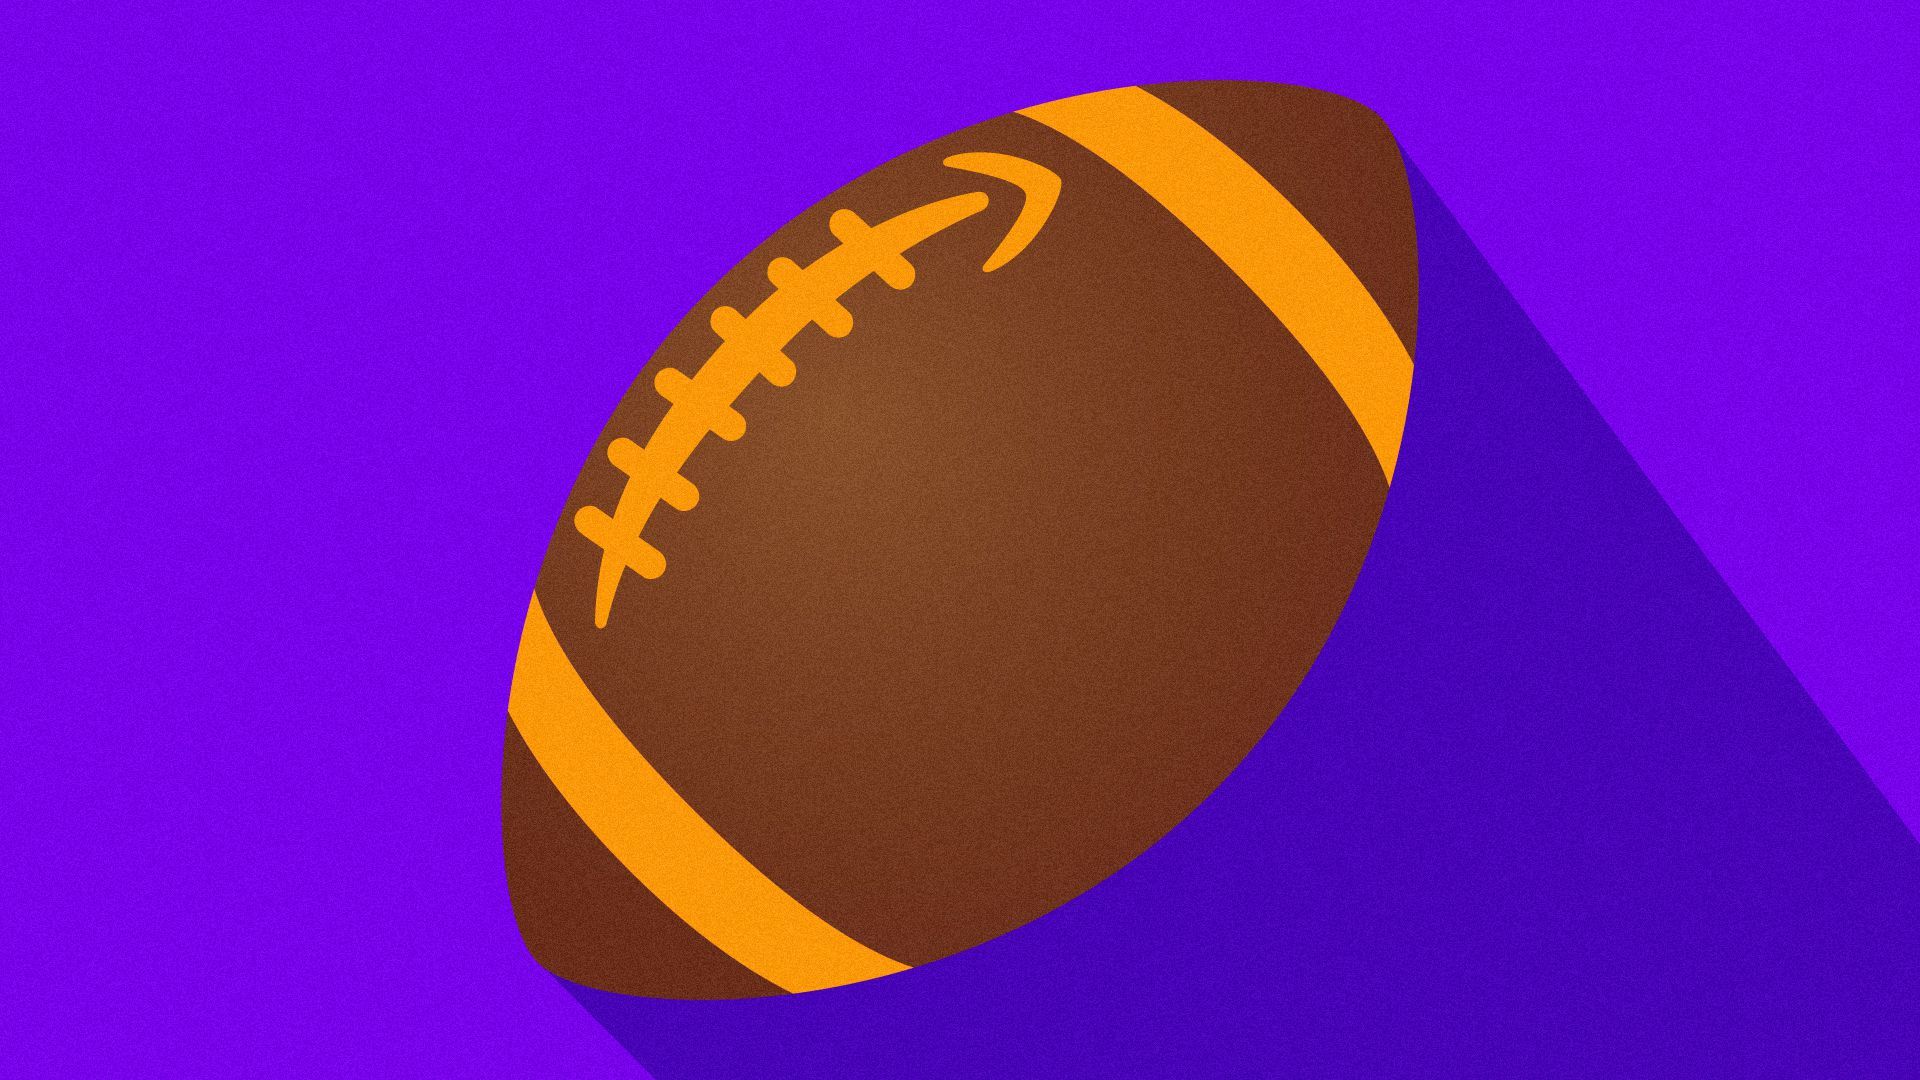 Illustration of a football with Amazon's logo as stitching.